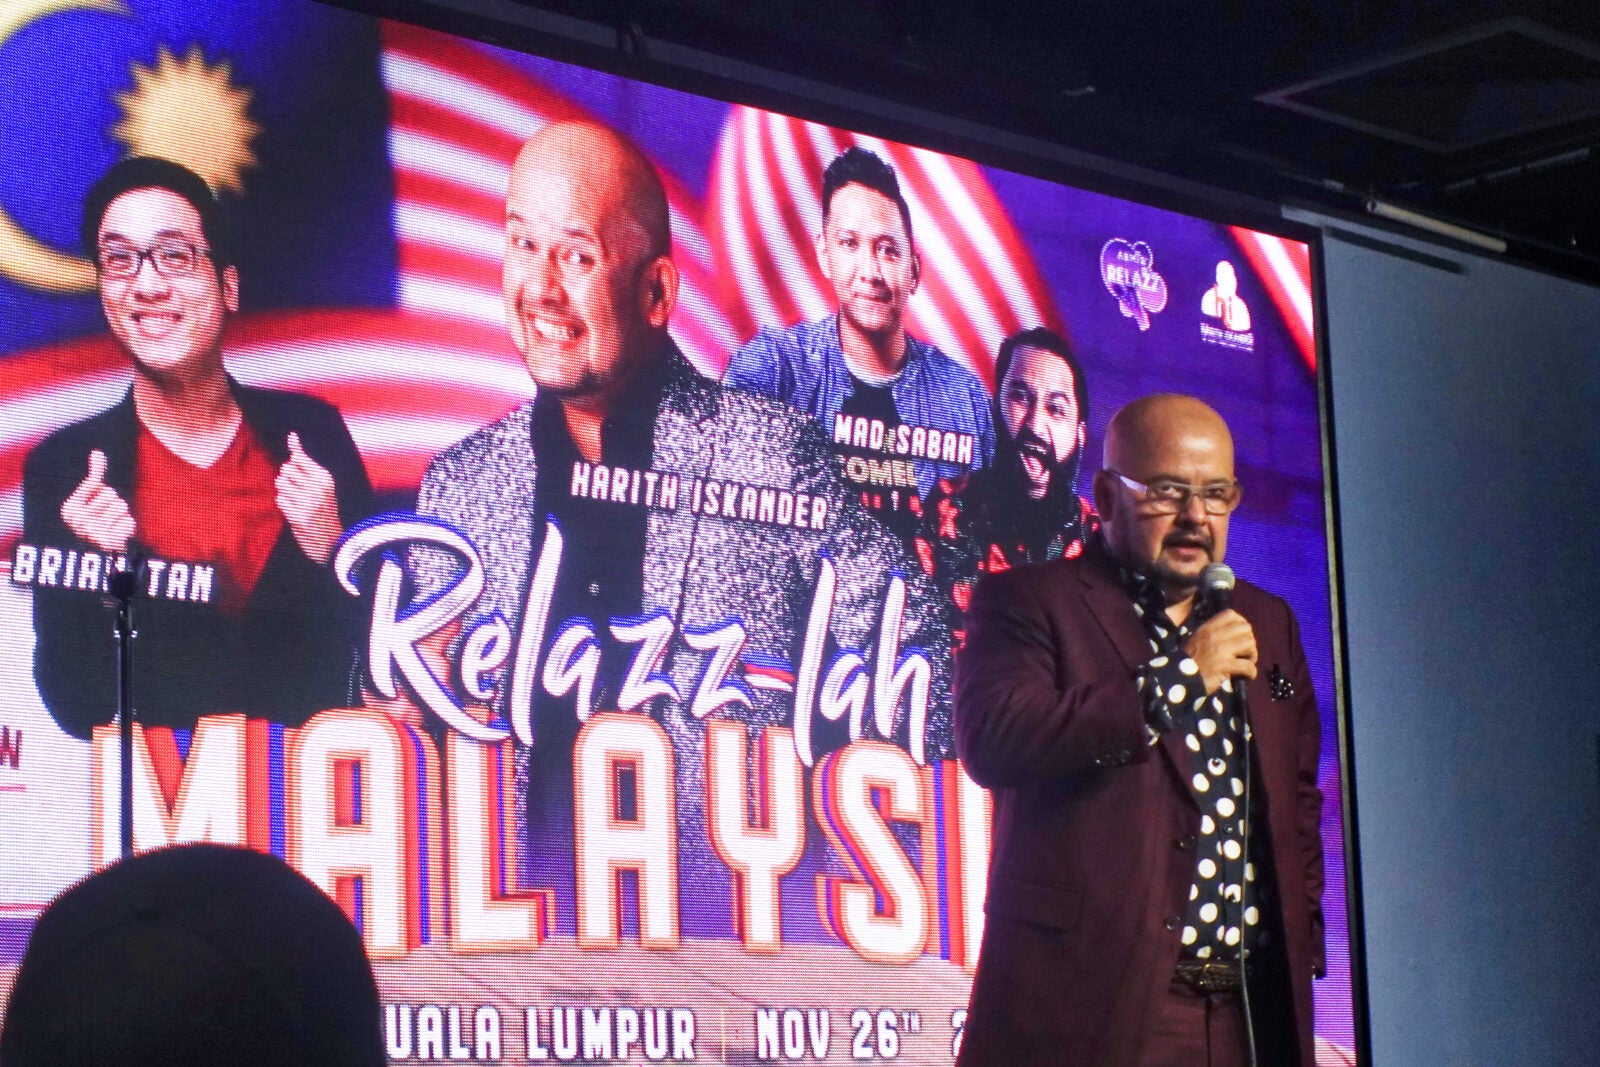 A Bald, Well-Dressed Man Stands On Stage Holding A Microphone. Behind Him Is A Screen That Showcases An Upcoming Event On The 26Th Of November Called &Quot;Relazz-Lah Malaysia&Quot; Which Features Four Comedians: Brian Tan, Harith Iskandar, Mad Sabah And Prakash Daniel.